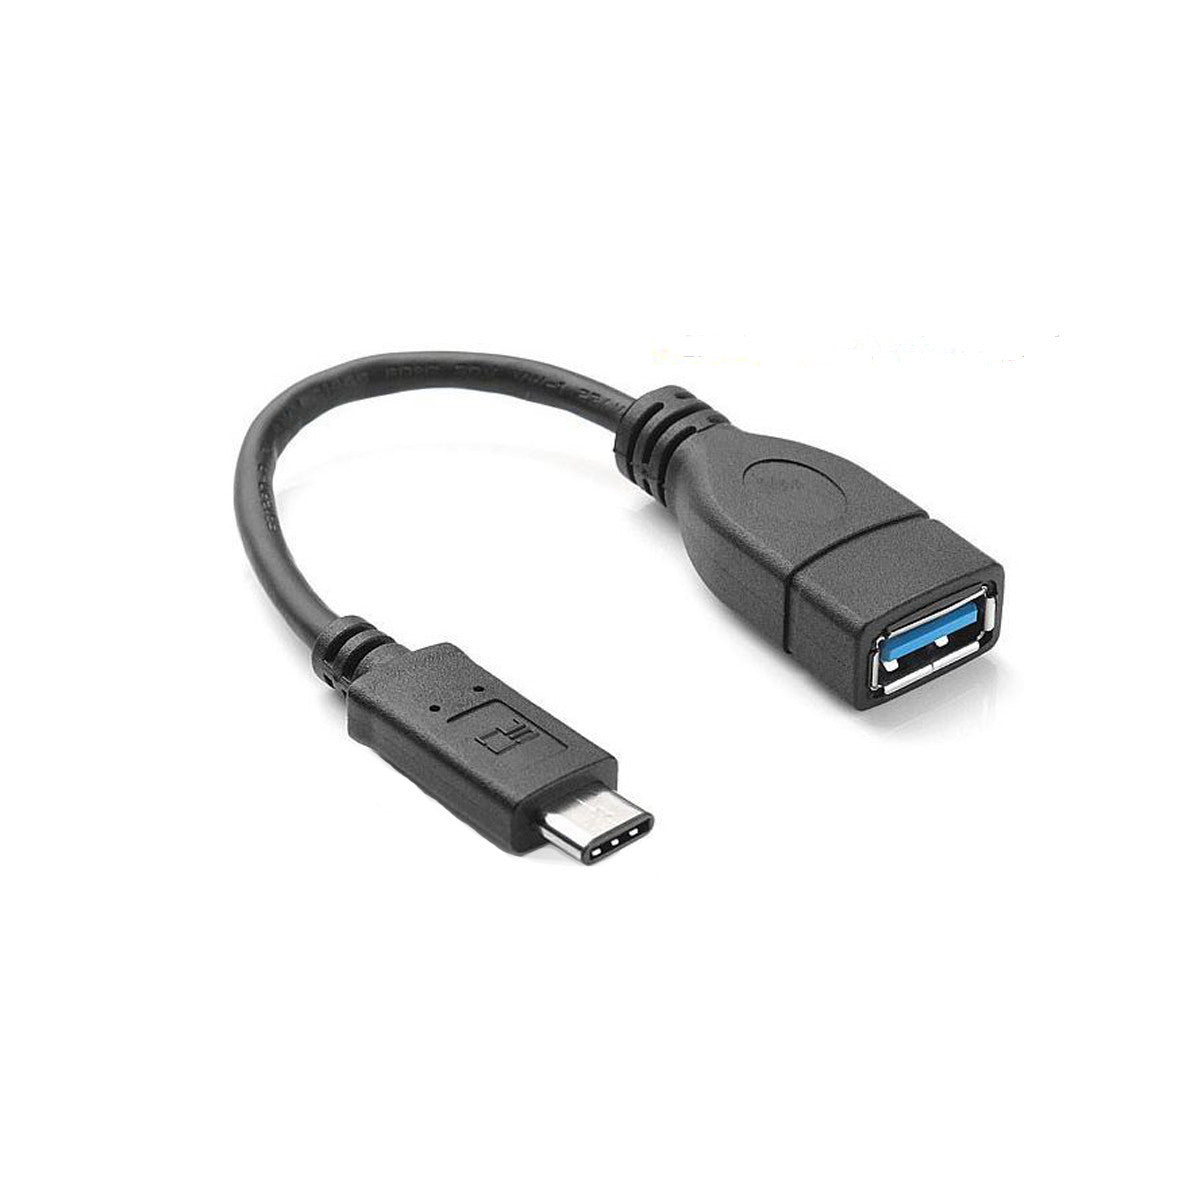 USB-C to USB 3.0 Adapter Cable for Apple Macbook Black  